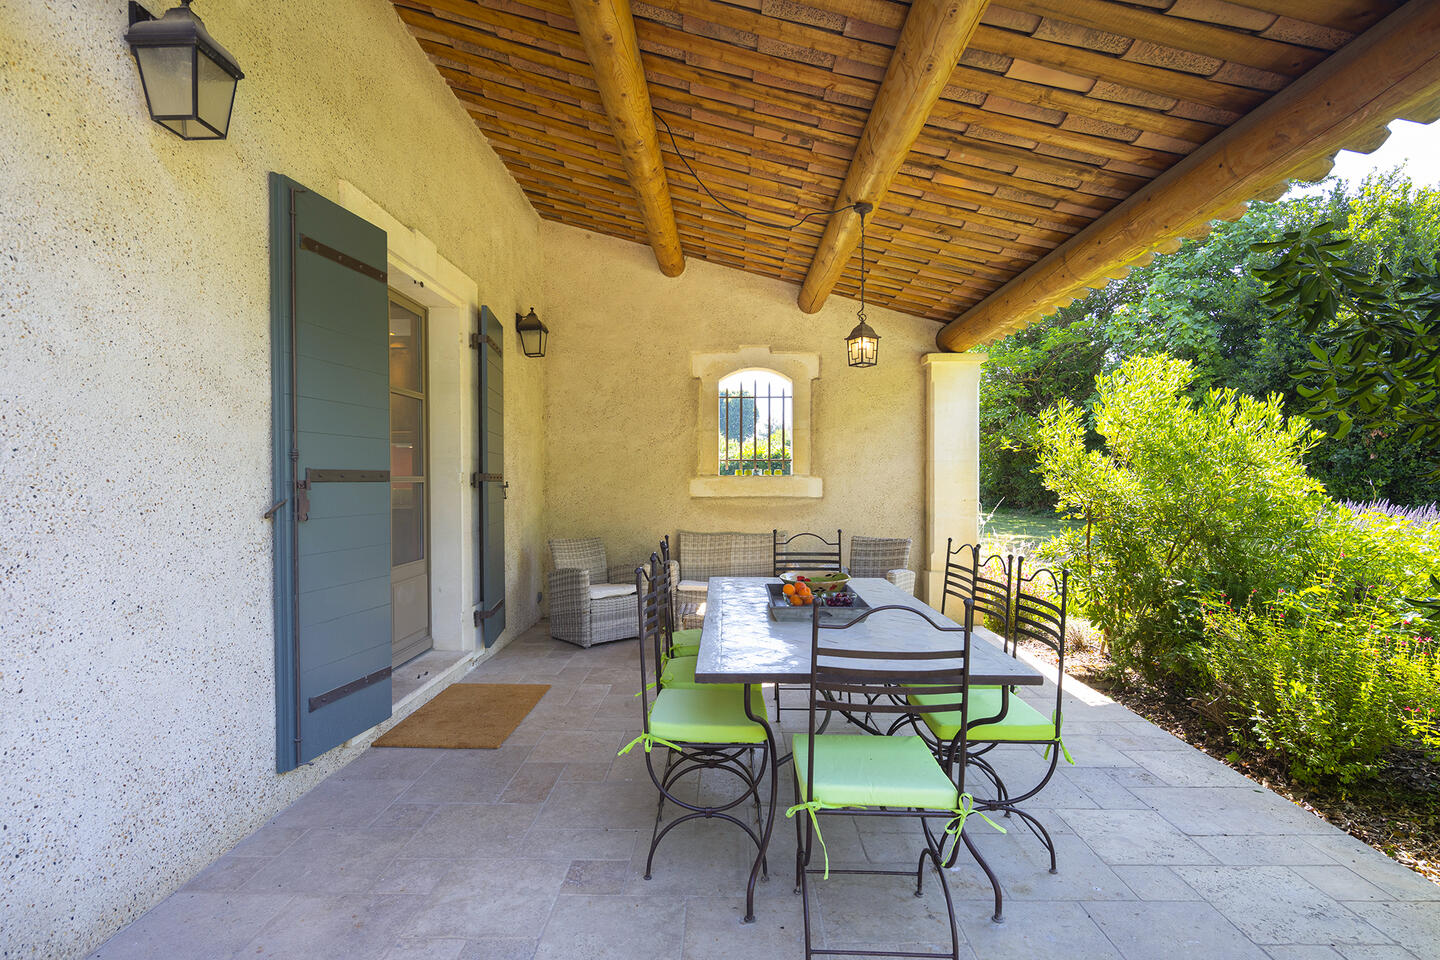 24 - Air-conditioned Bastide with swimming pool near the centre of Saint-Rémy: Villa: Interior